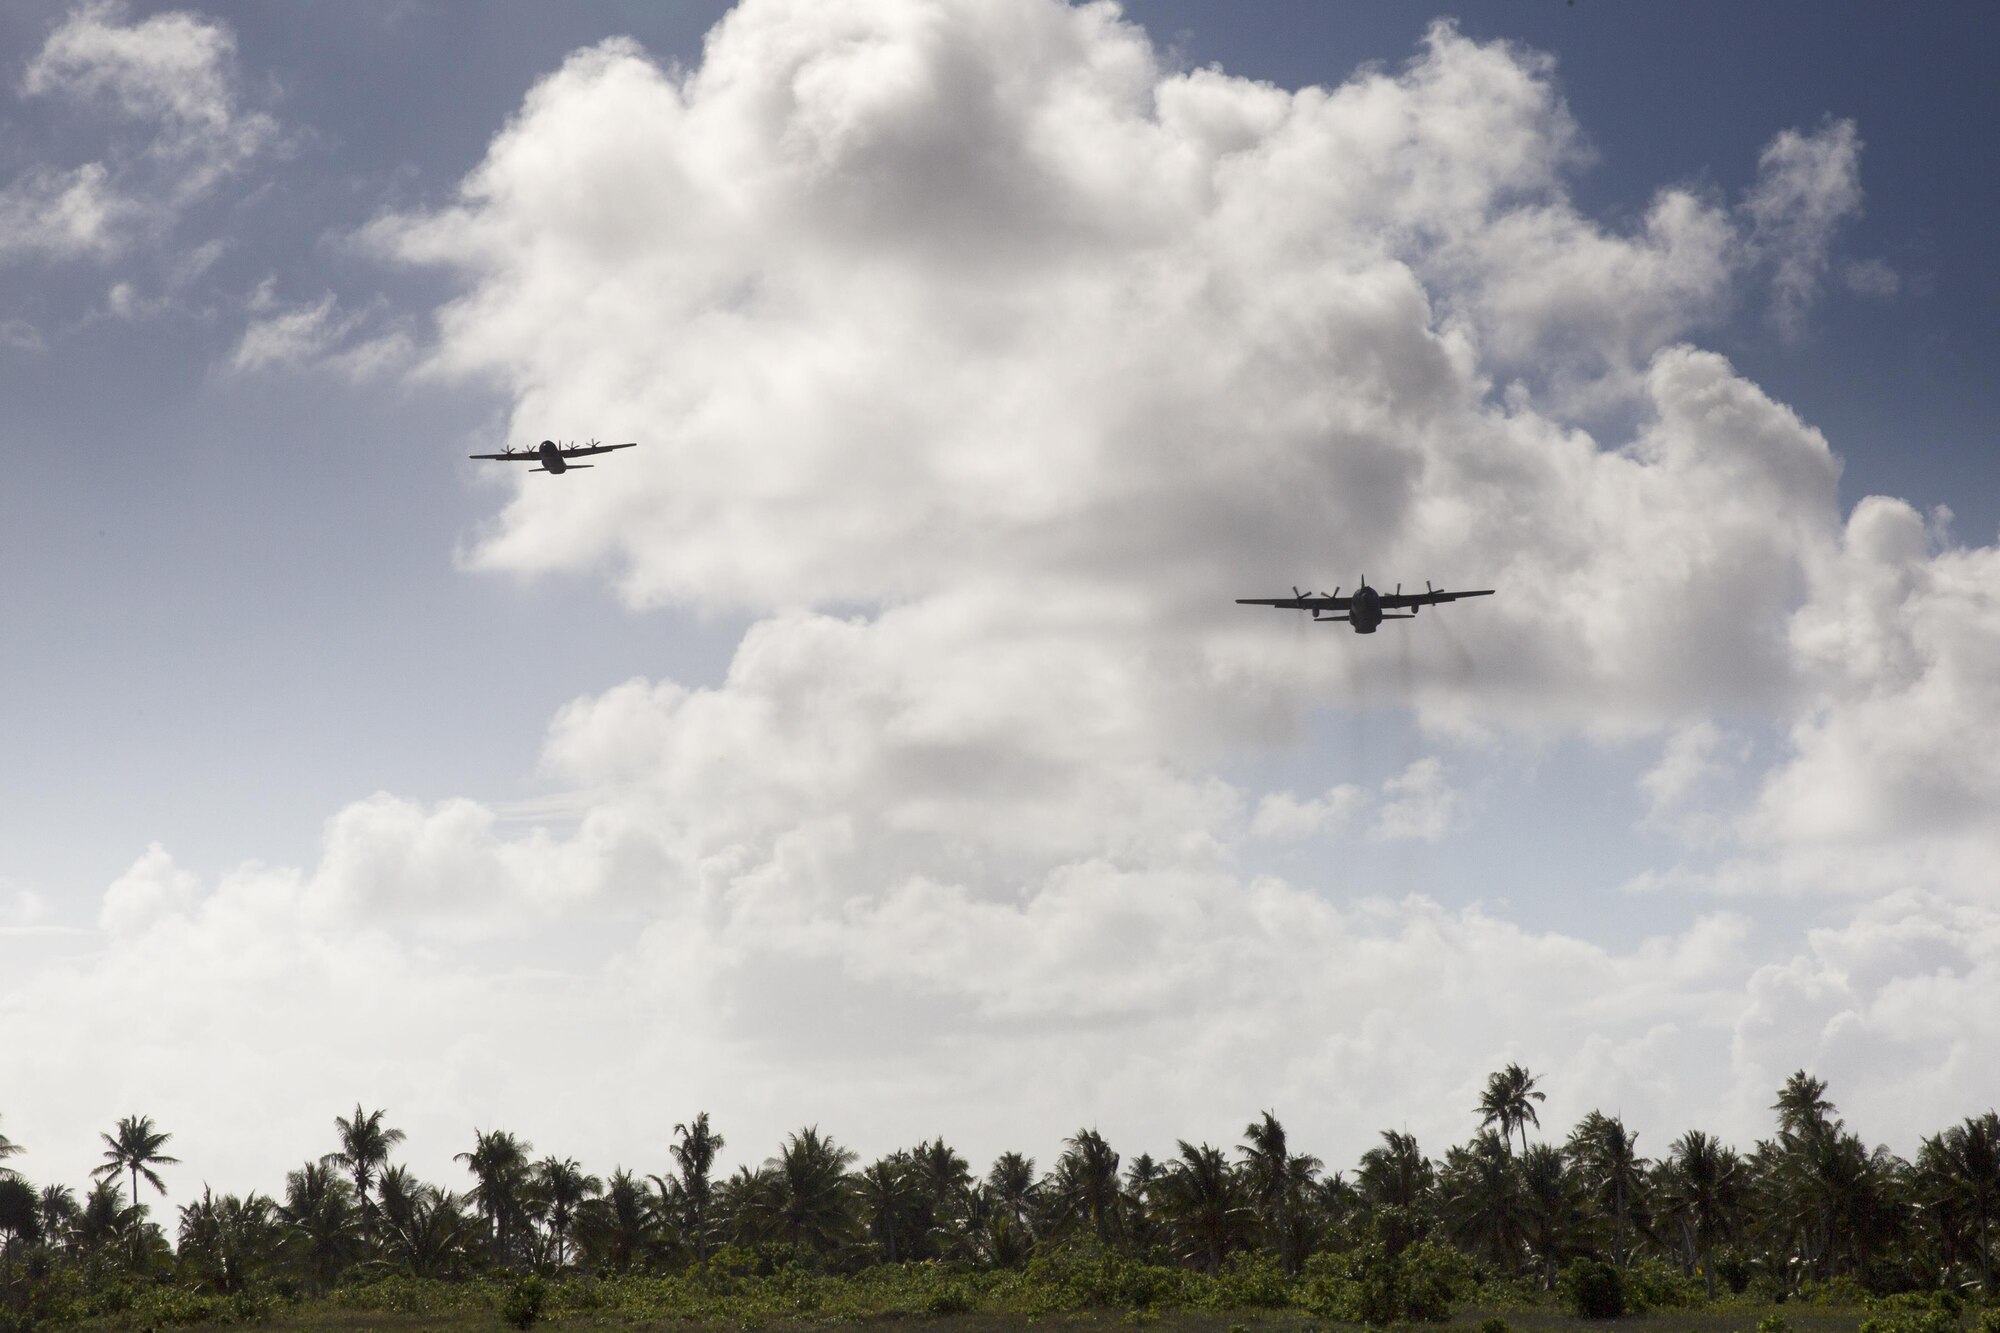 (Left) A Royal Australian Air Force C-130 J Super Hercules and a U.S. Air Force C-130 Hercules from the Yokota Air Base, Japan fly over Fais island, Federated States of Micronesia, Dec. 8, 2015, during Operation Christmas Drop 2015. A  Hercules assigned by the 36th Airlift Squadron delivered over 800 pounds of supplies to Fais Island during Operation Christmas Drop 2015. This year marks the first ever trilateral Operation Christmas Drop where the U.S. Air Force, Japan Air Self-Defense Force and the Royal Australian Air Force work together to provide critical supplies to 56 Micronesian islands.(U.S. Air Force photo by Osakabe Yasuo/Released)